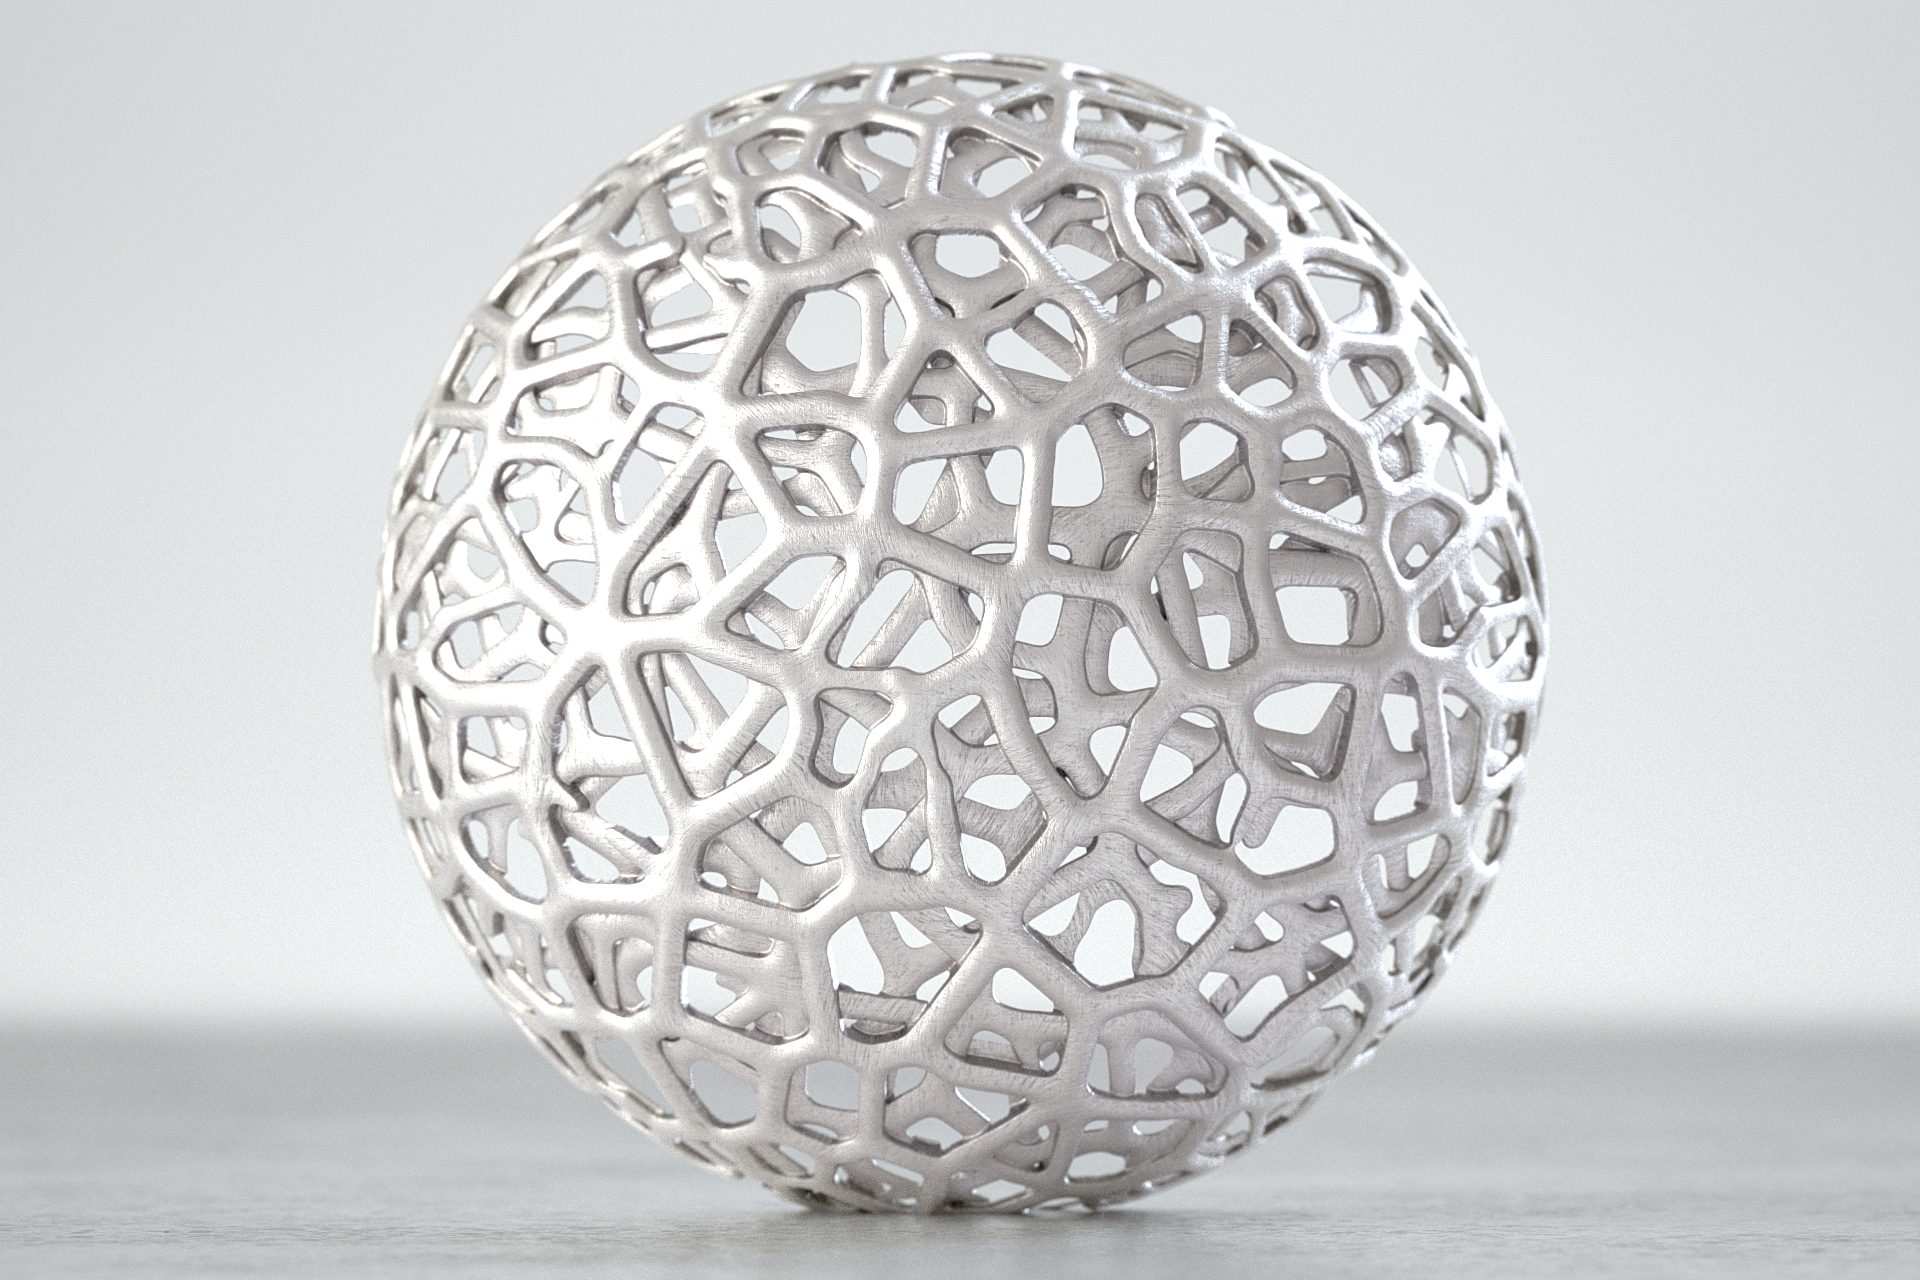 New Materials to Help Visualize 3D-Printed Objects Released